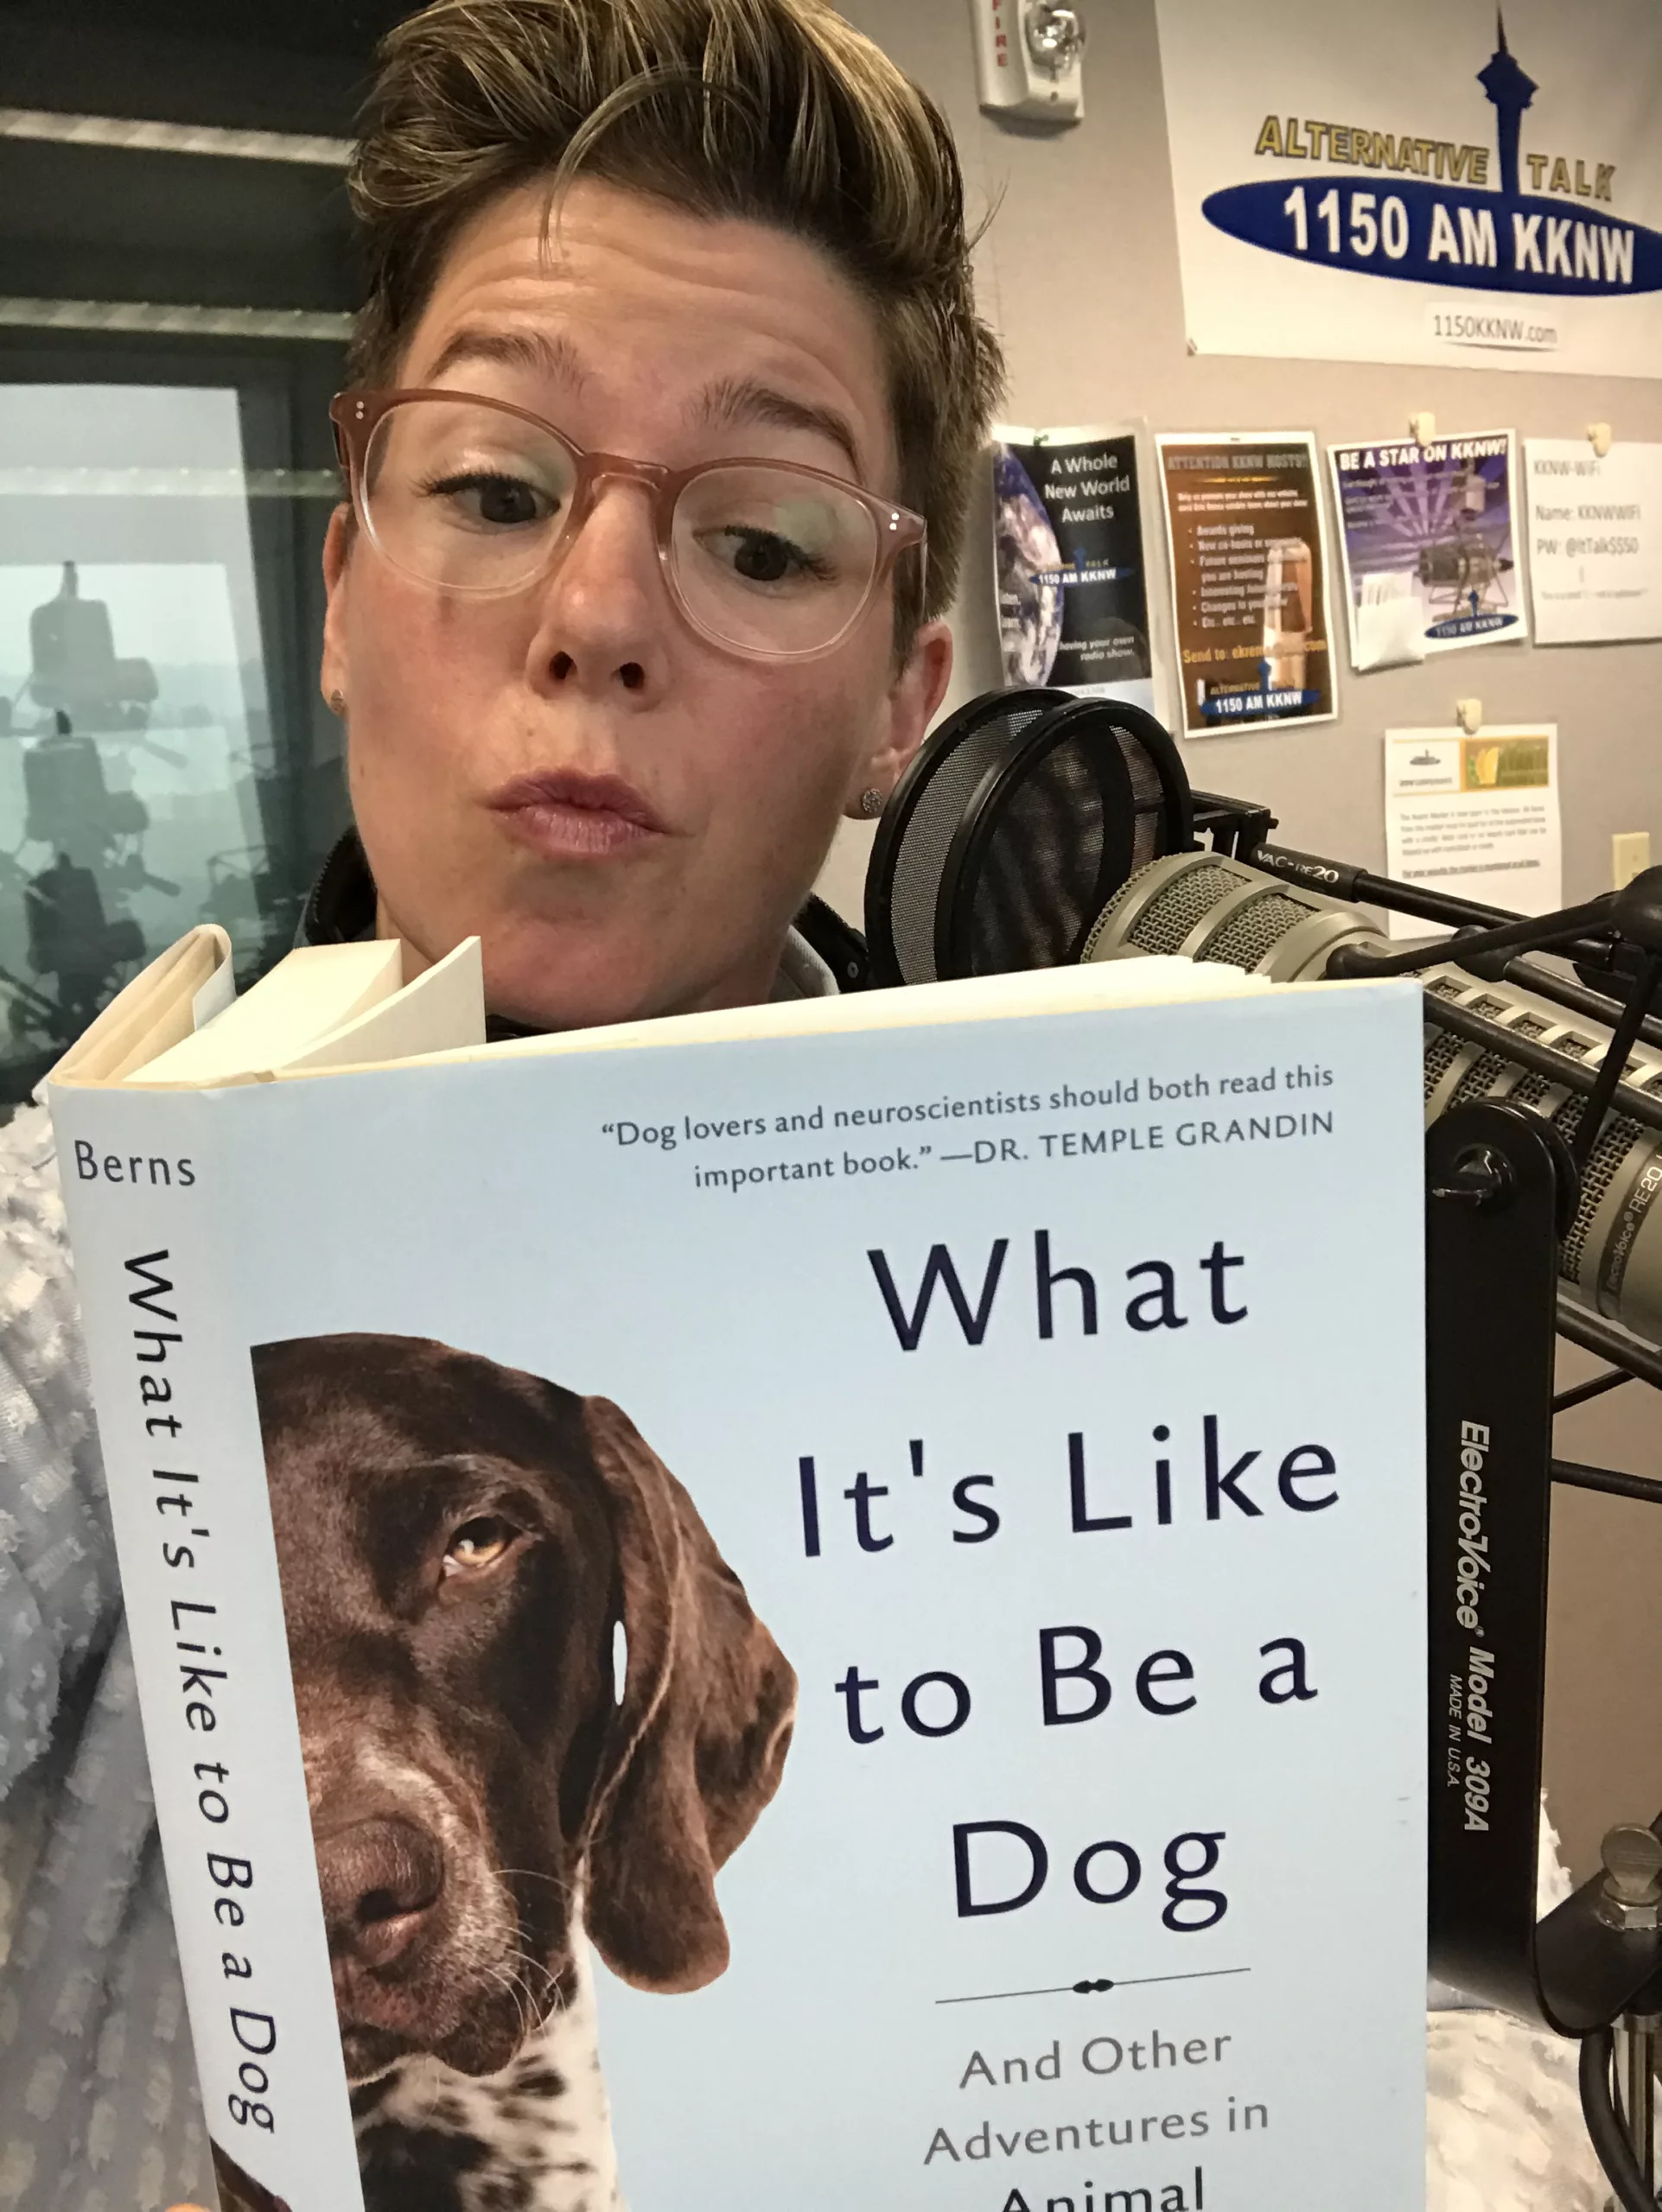 445: “What’s It Like to Be a Dog”, author Gregory Berns